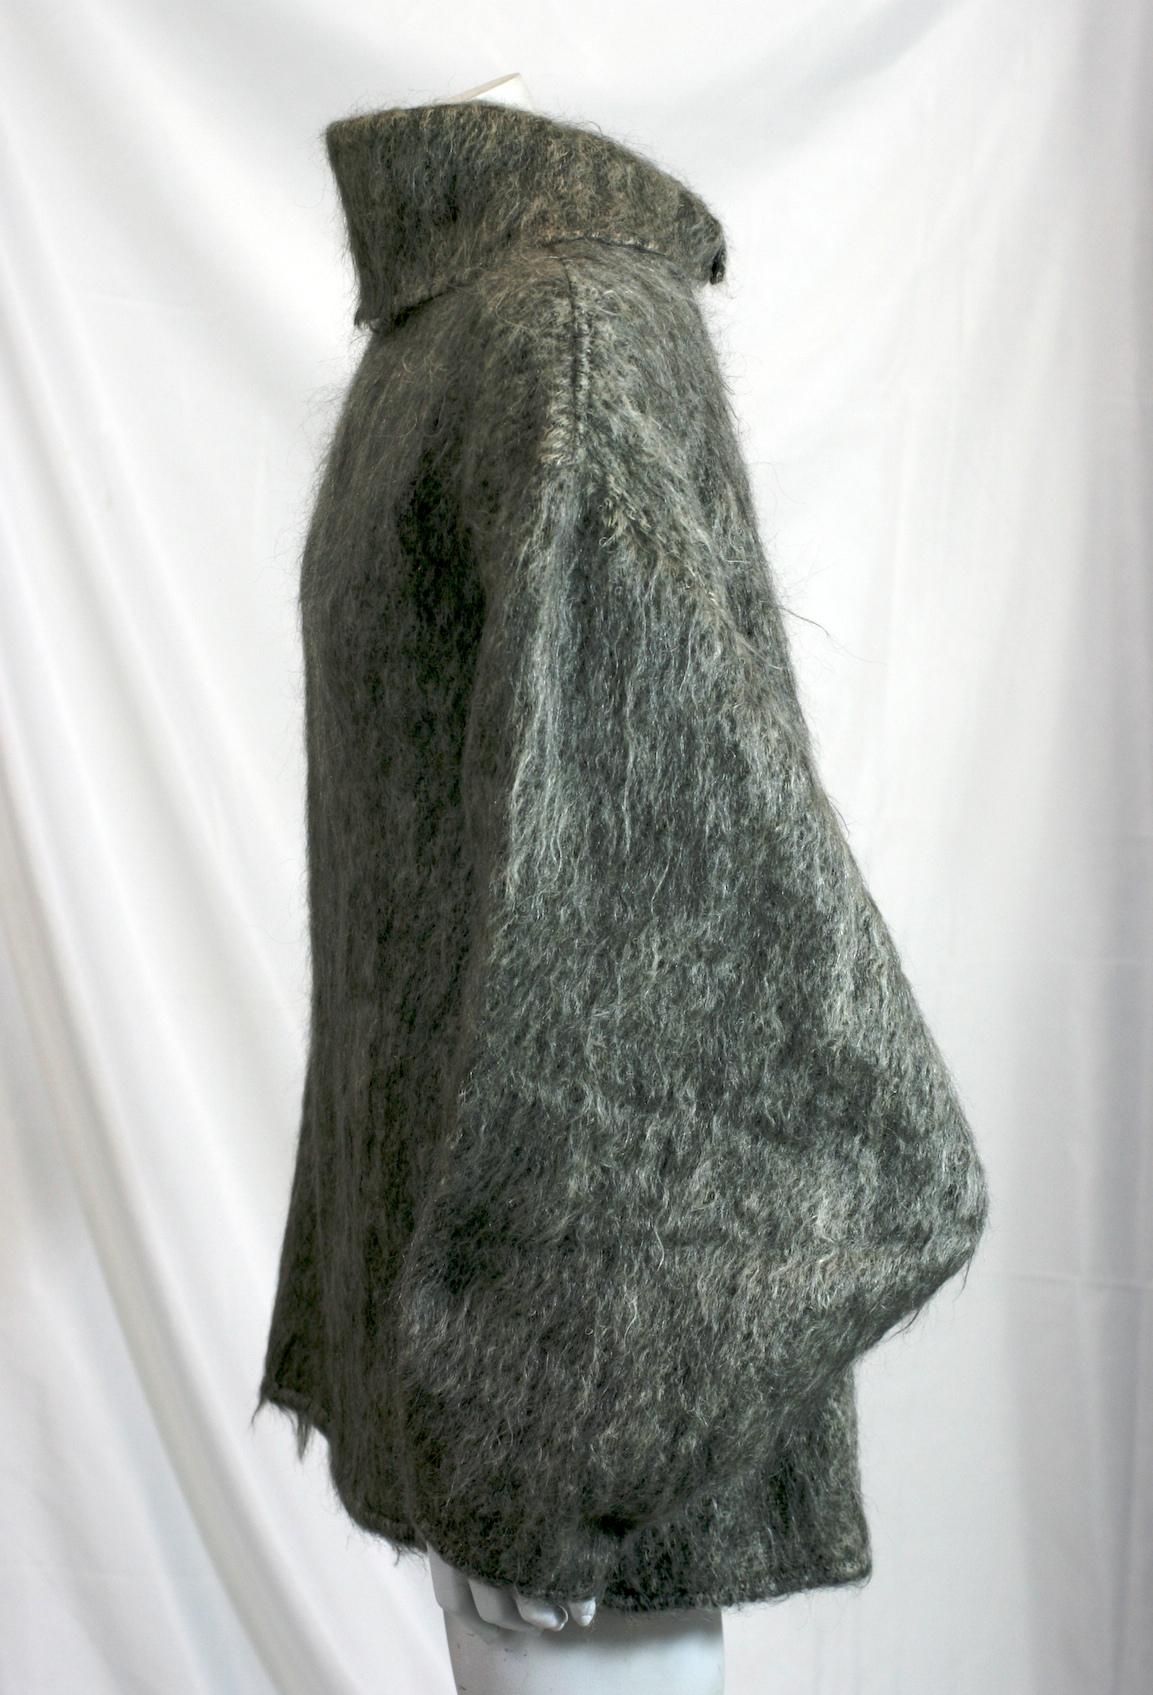 Anne Marie Beretta Brushed Grey Mohair Blouse from the 1980's. Large collar with deep sleeves with signature pointed elbow cuts. Black grosgrain with snap fittings on back closure. Collar has snaps at base to from a high or open collar. Blouse can